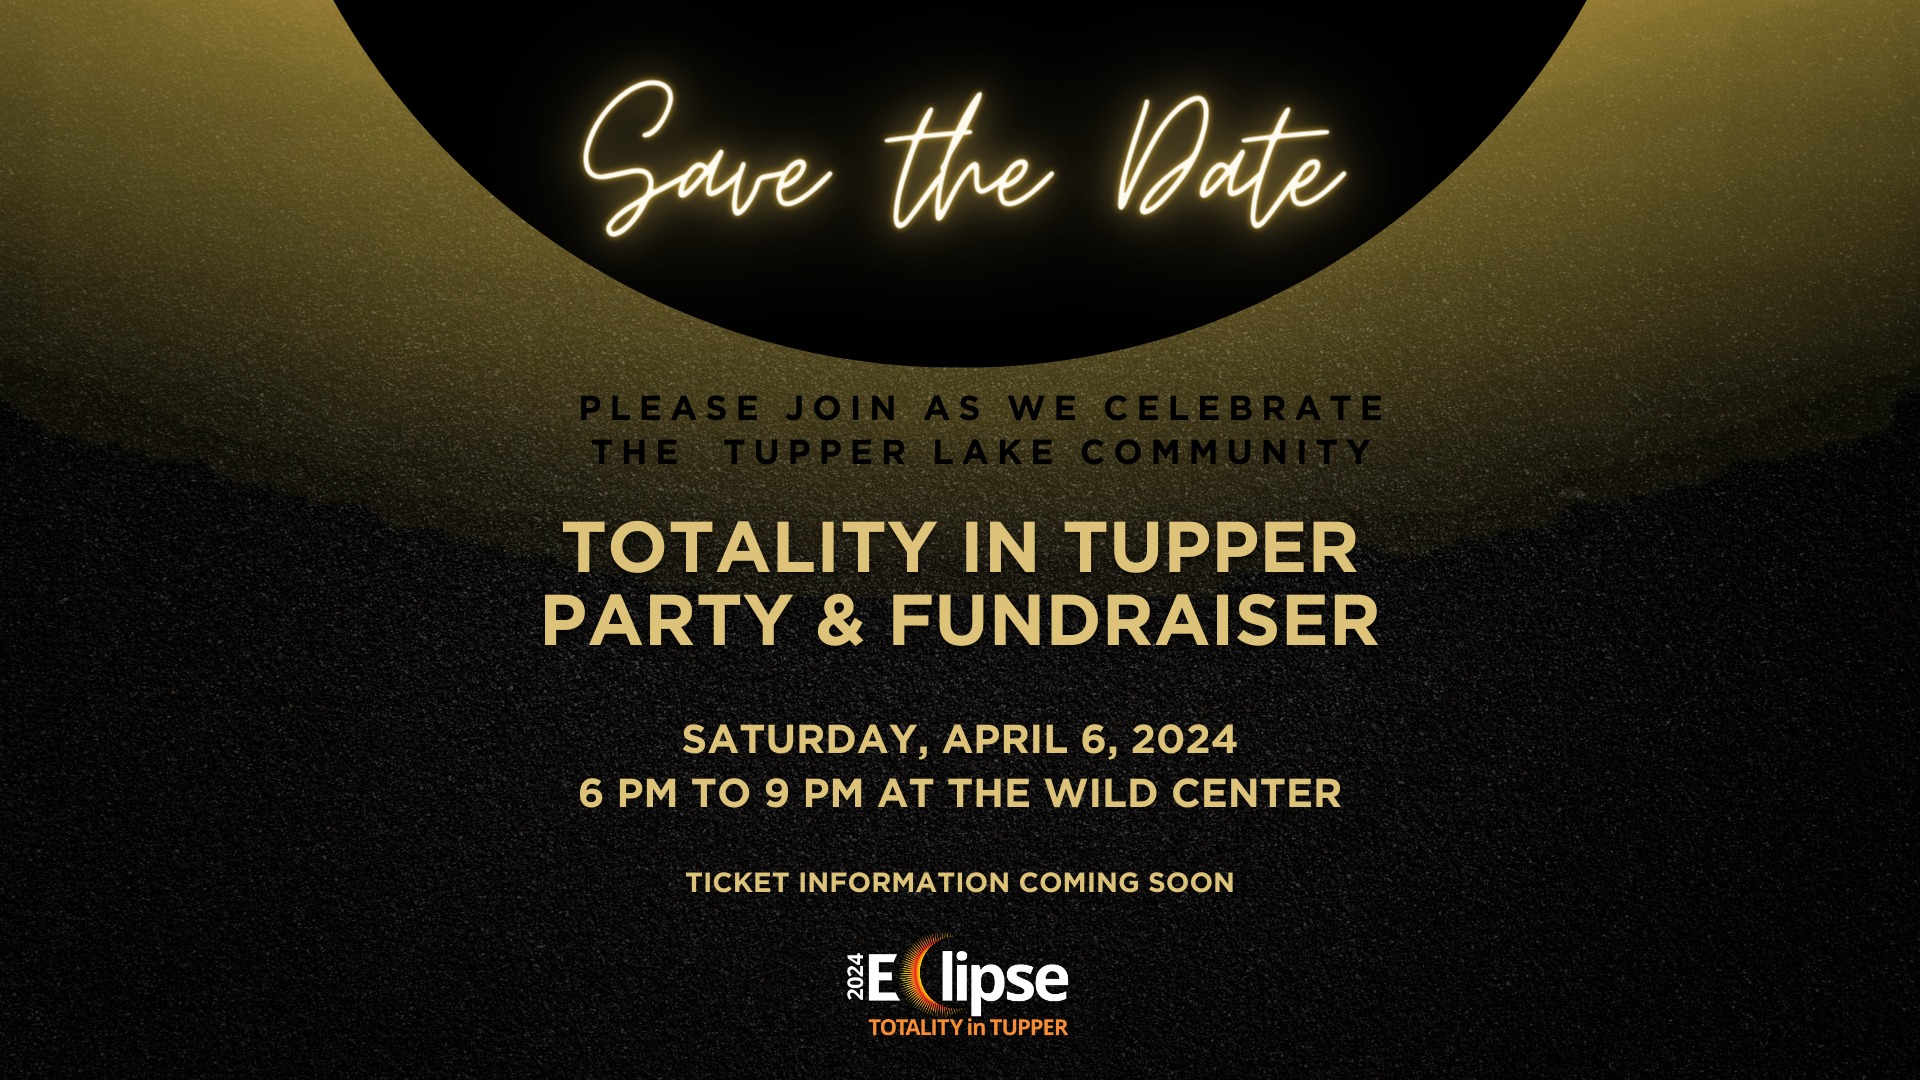 Totality in Tupper Party & Fundraiser